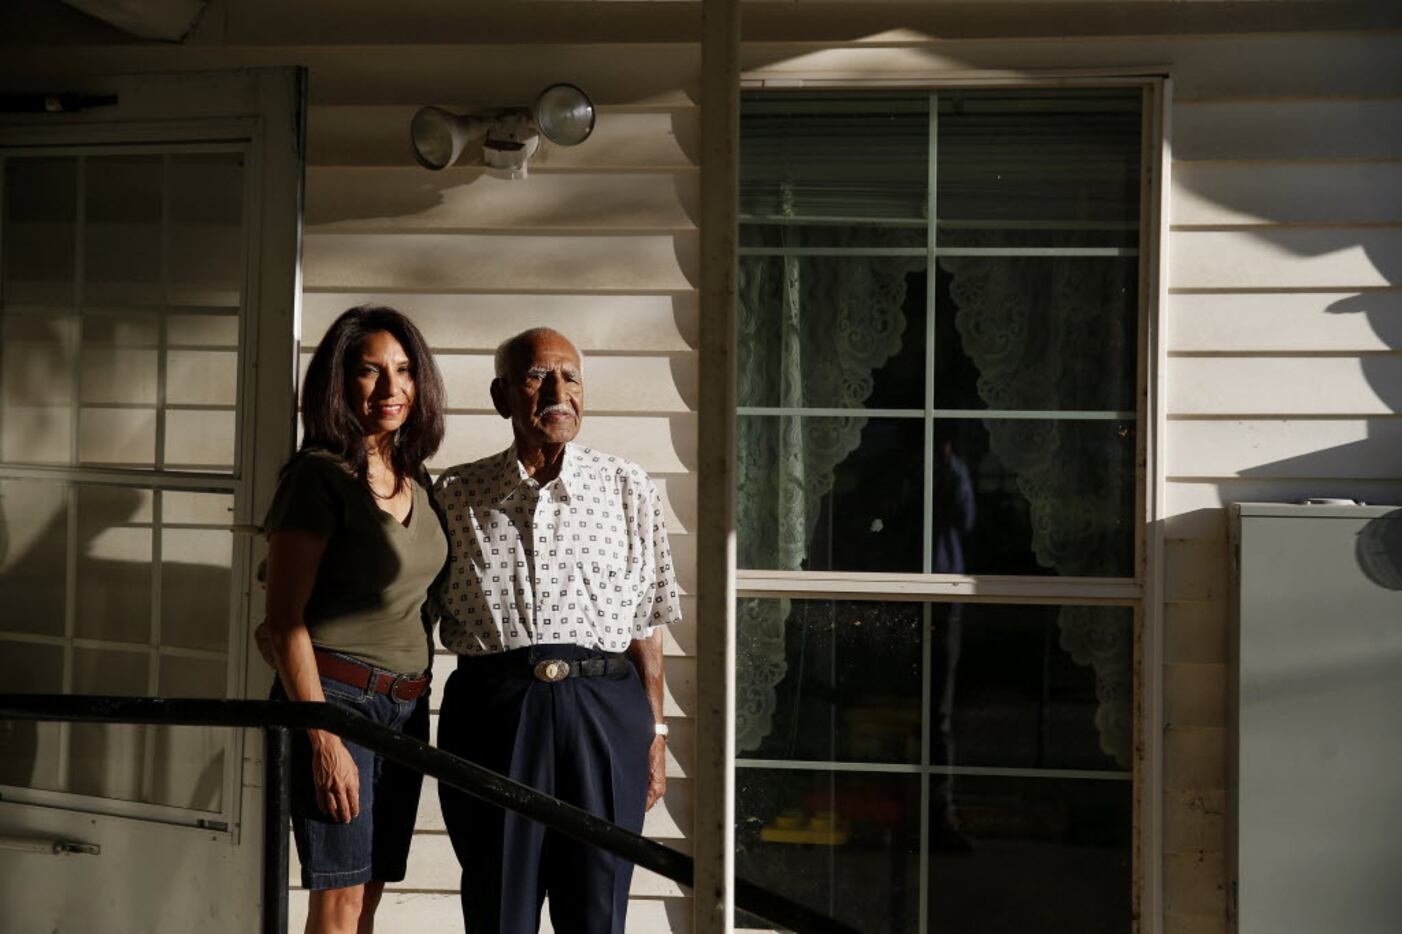 In June of this year, Maria G. Garcia stood with her father Feliz H. Lozada Sr. at the...